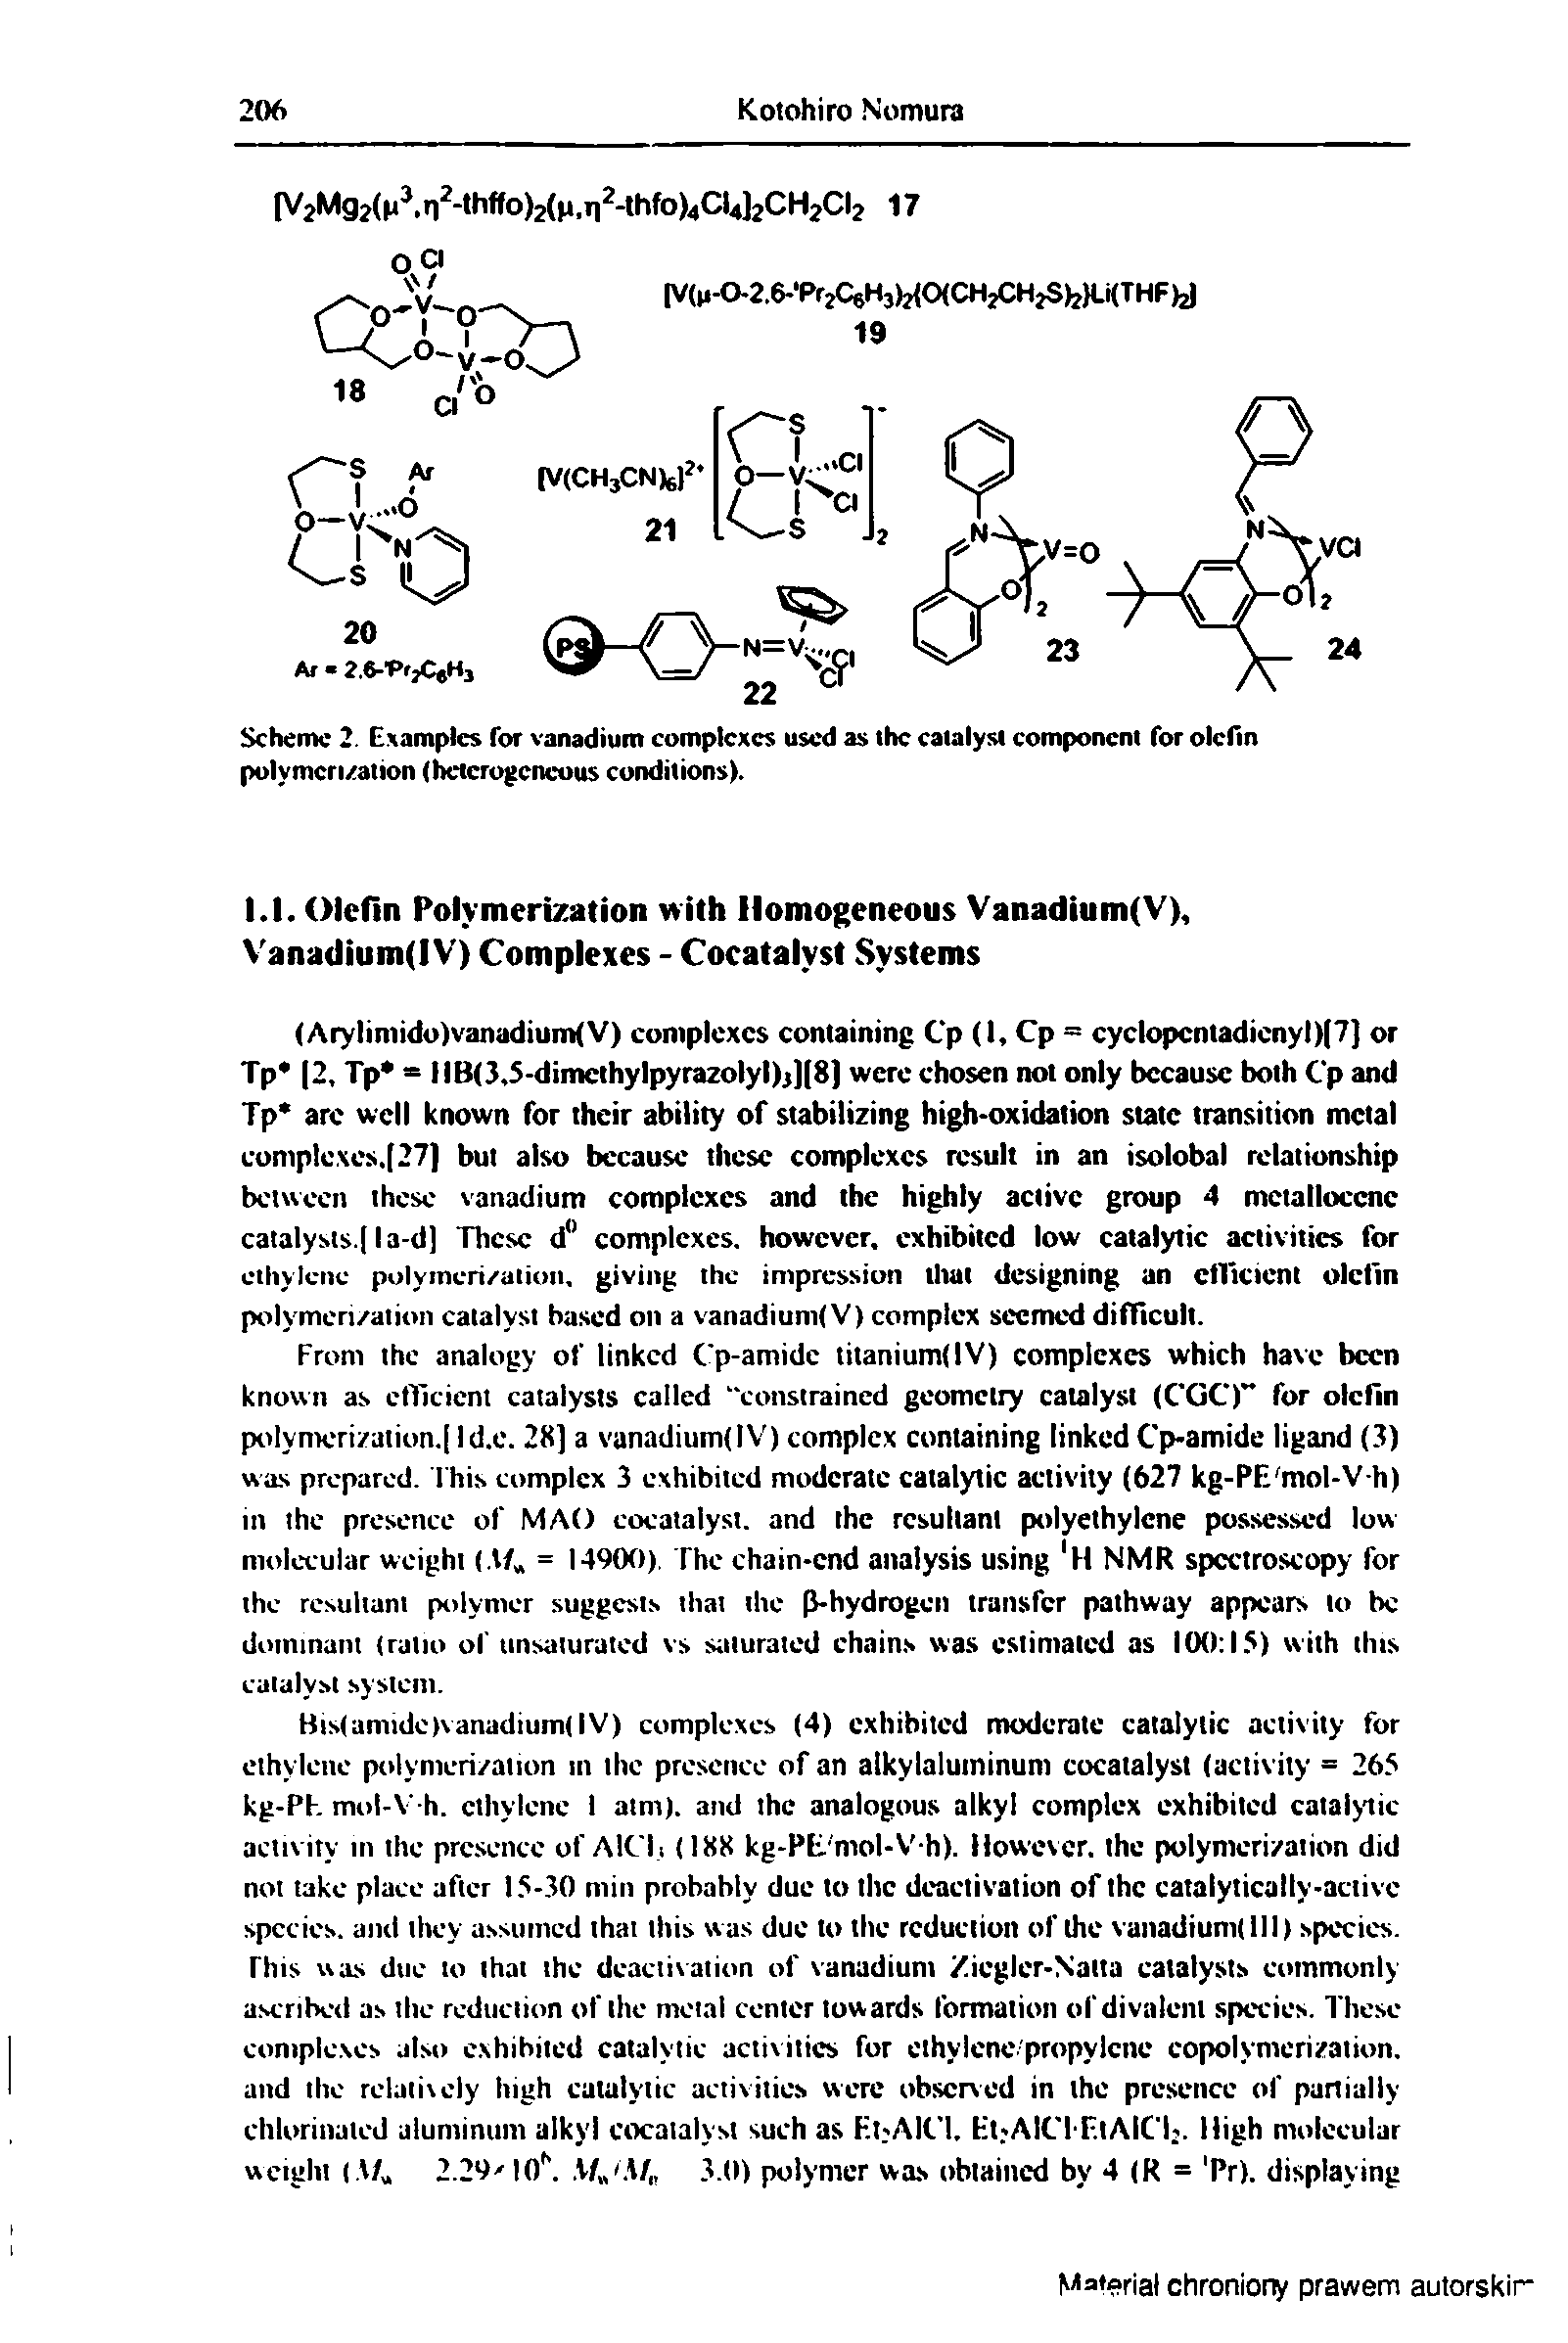 Scheme 2. Examples Tor vanadium complexes used as the catalyst component for olefin polymerization (heterogeneous conditions).